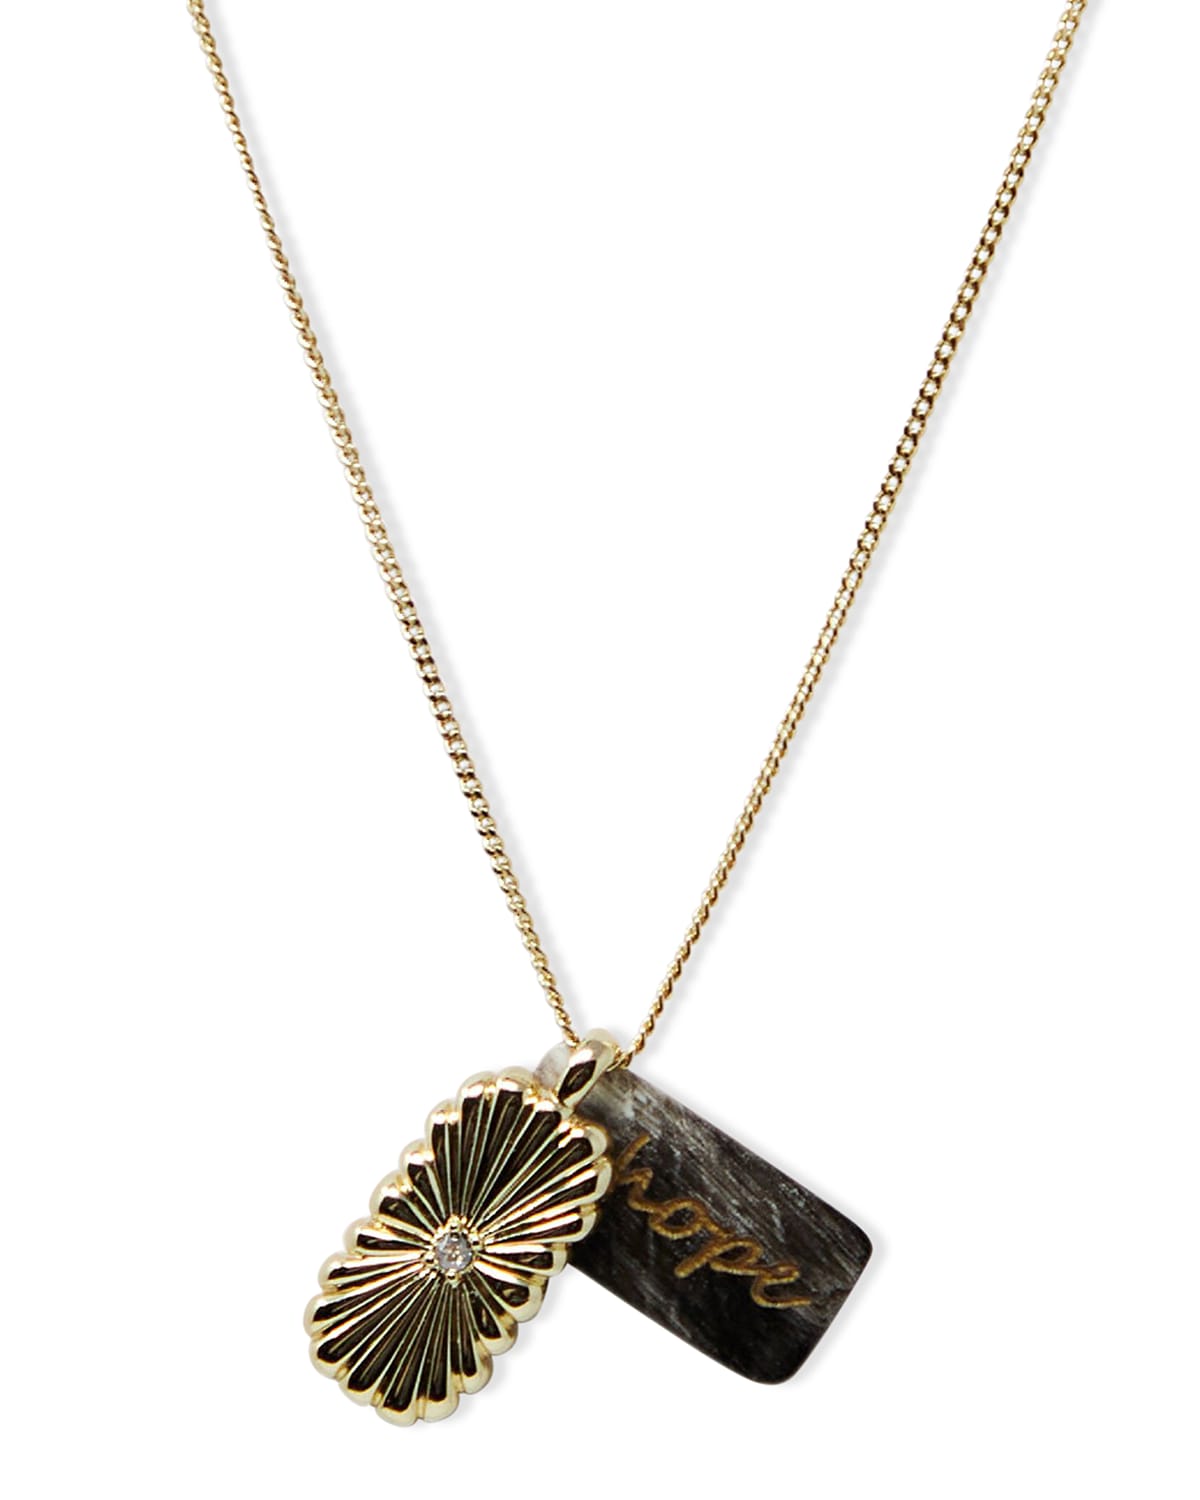 Akola Hope Inspirational Chain Pendant Necklace With Horn In Black